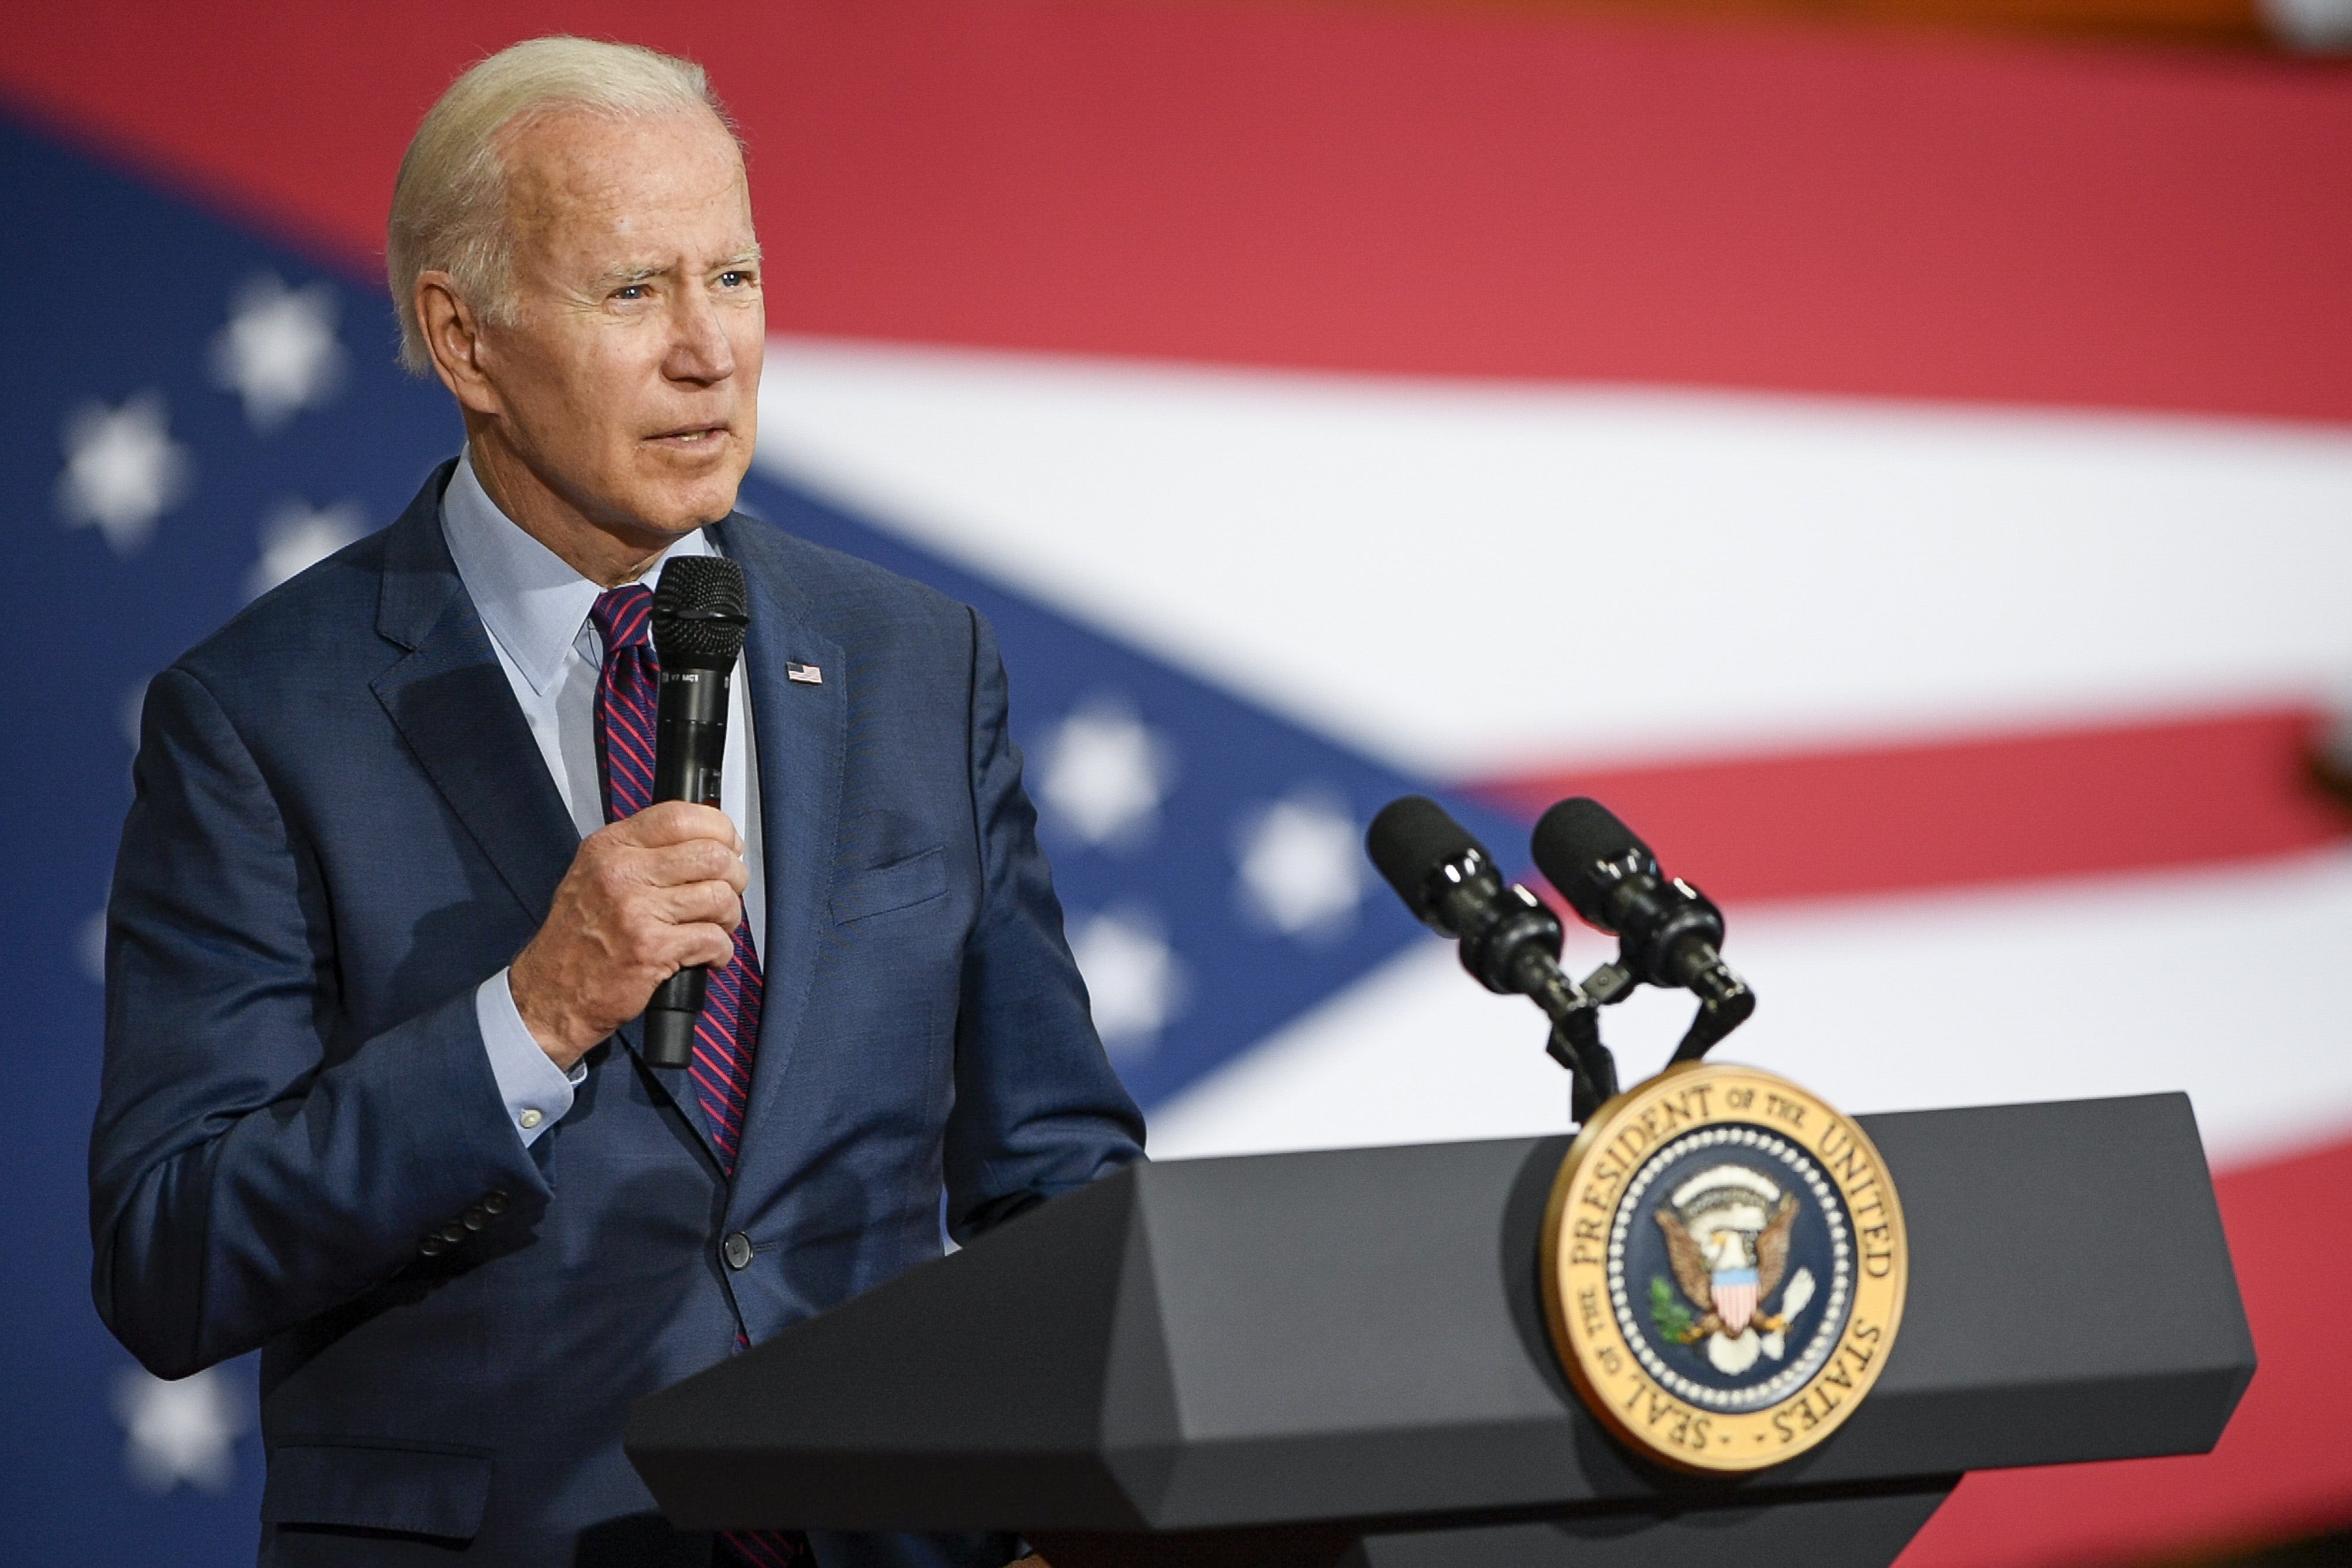 Biden torched for reminiscing about 'the old days' of having lunch with 'real segregationists' in the Senate